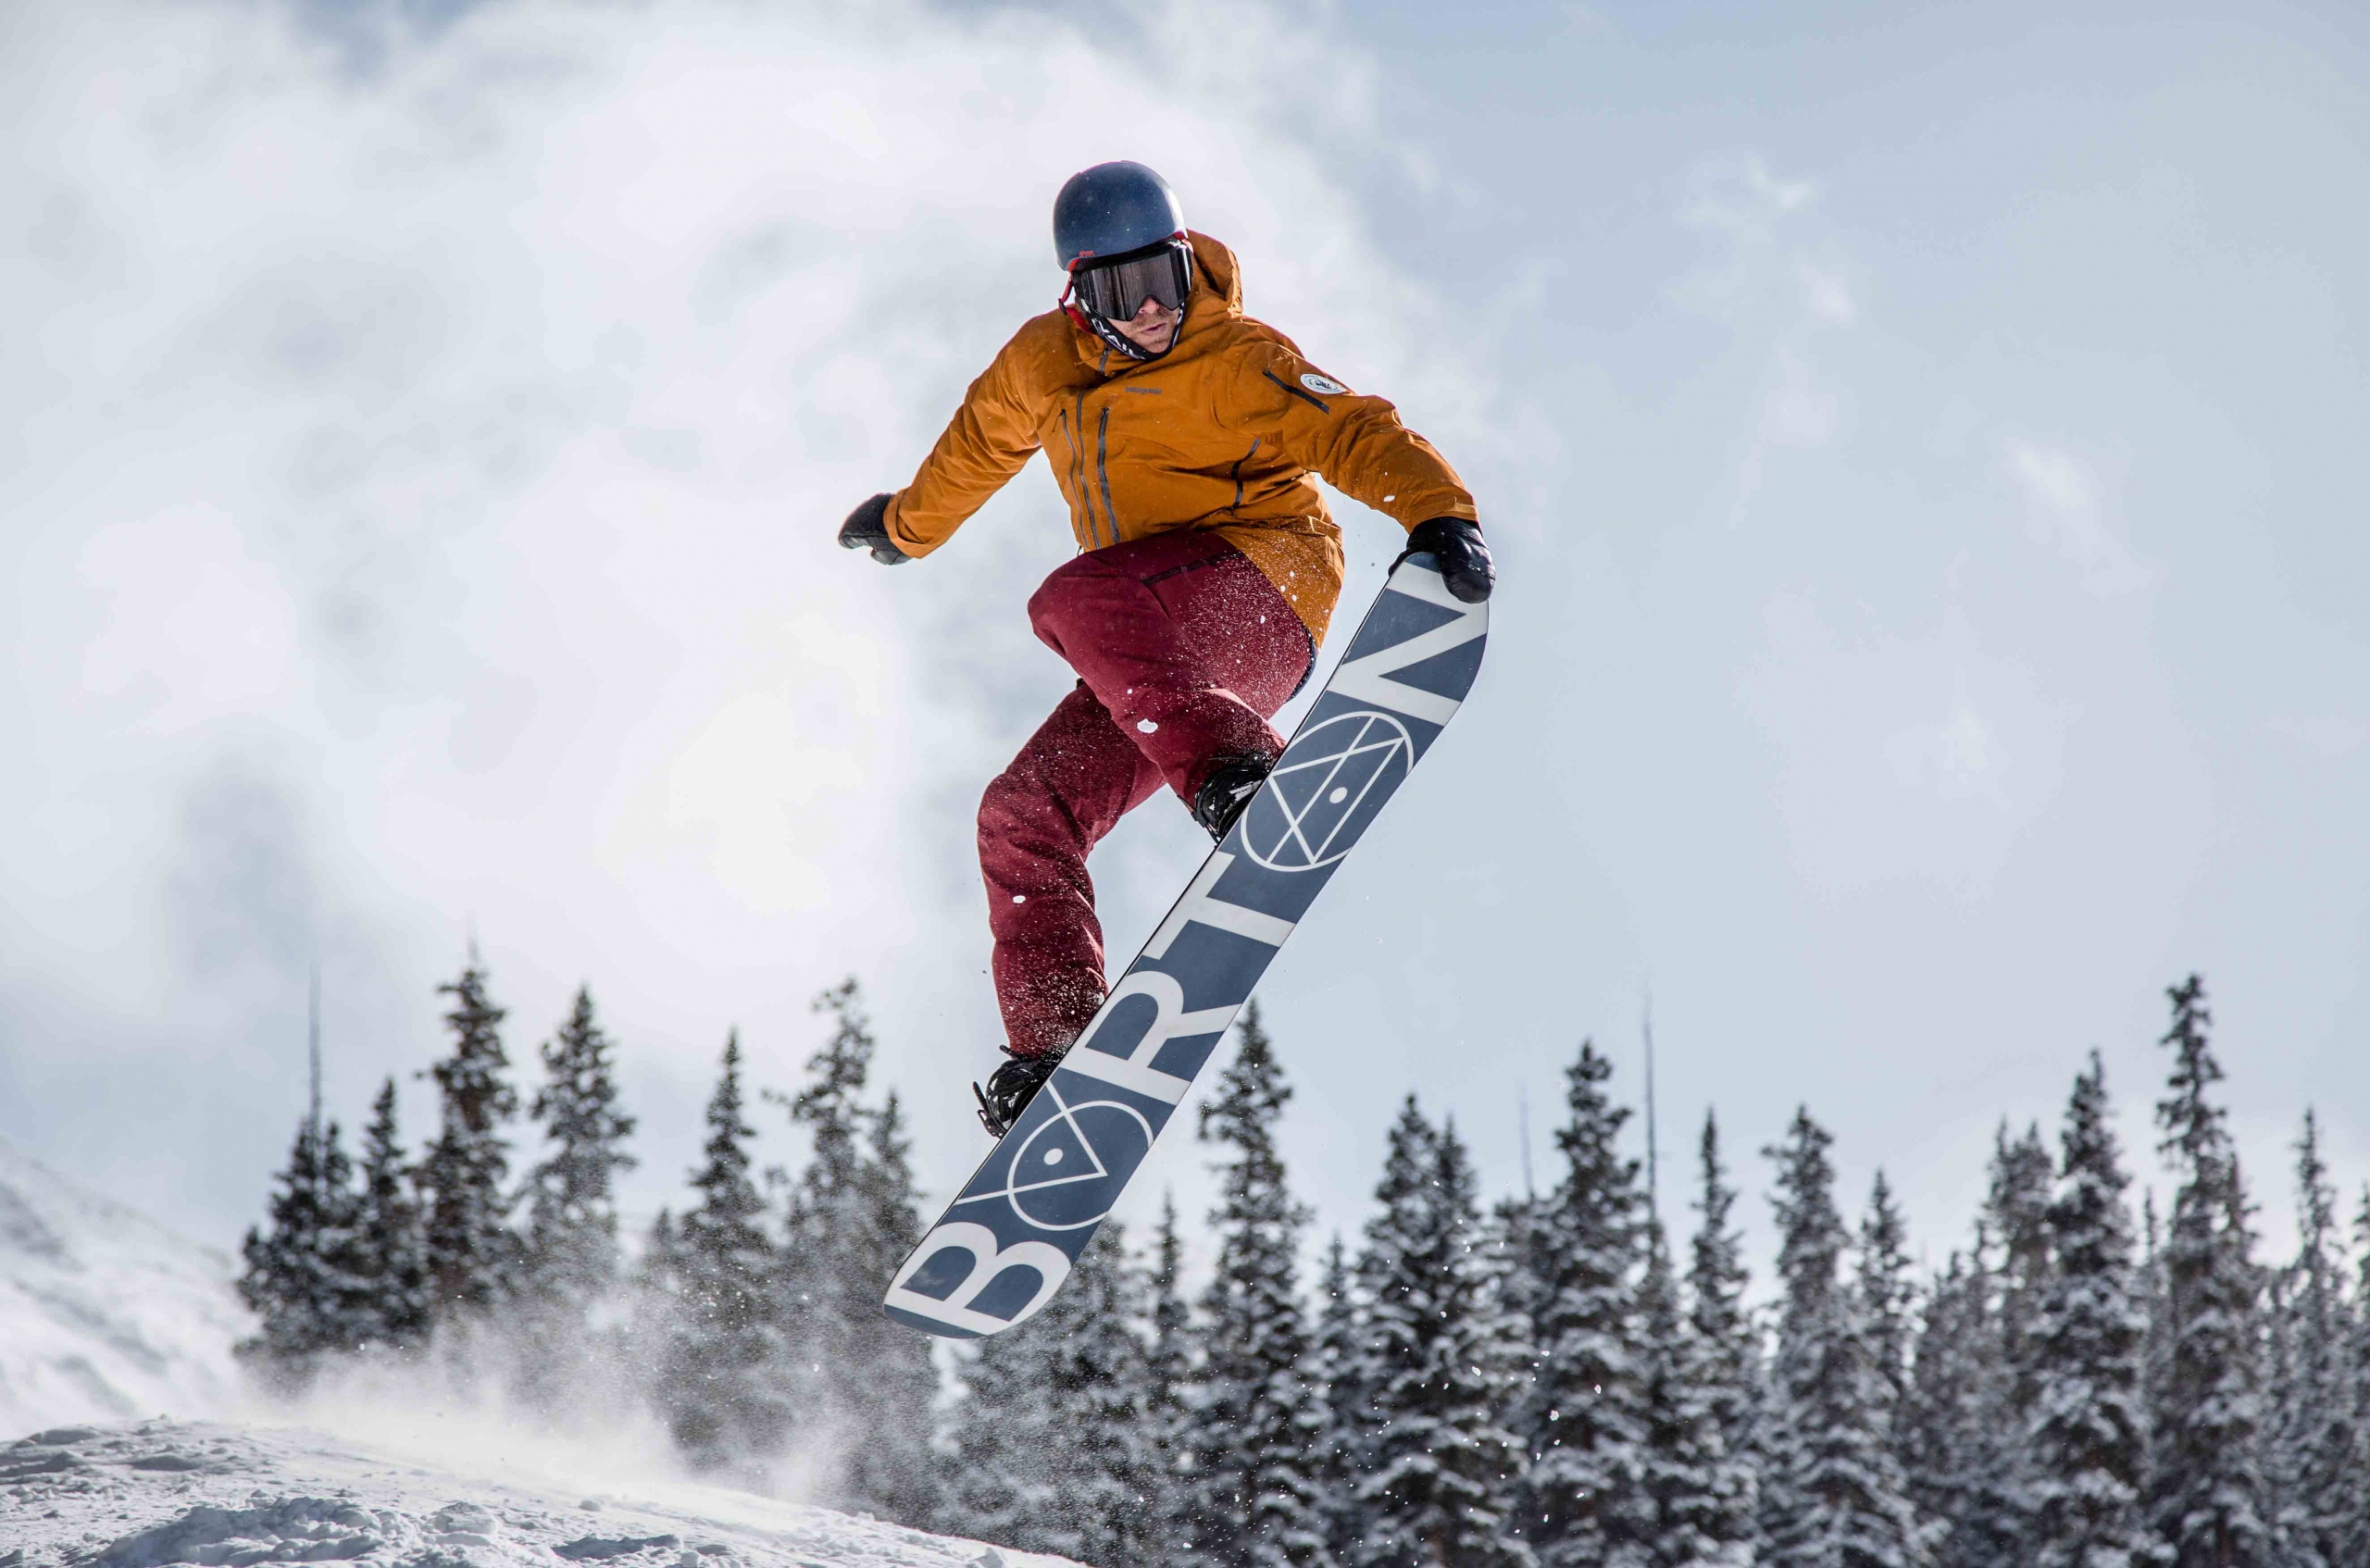 AASI Snowboard Team Member Chris Rogers does a nose grab on his Burton board